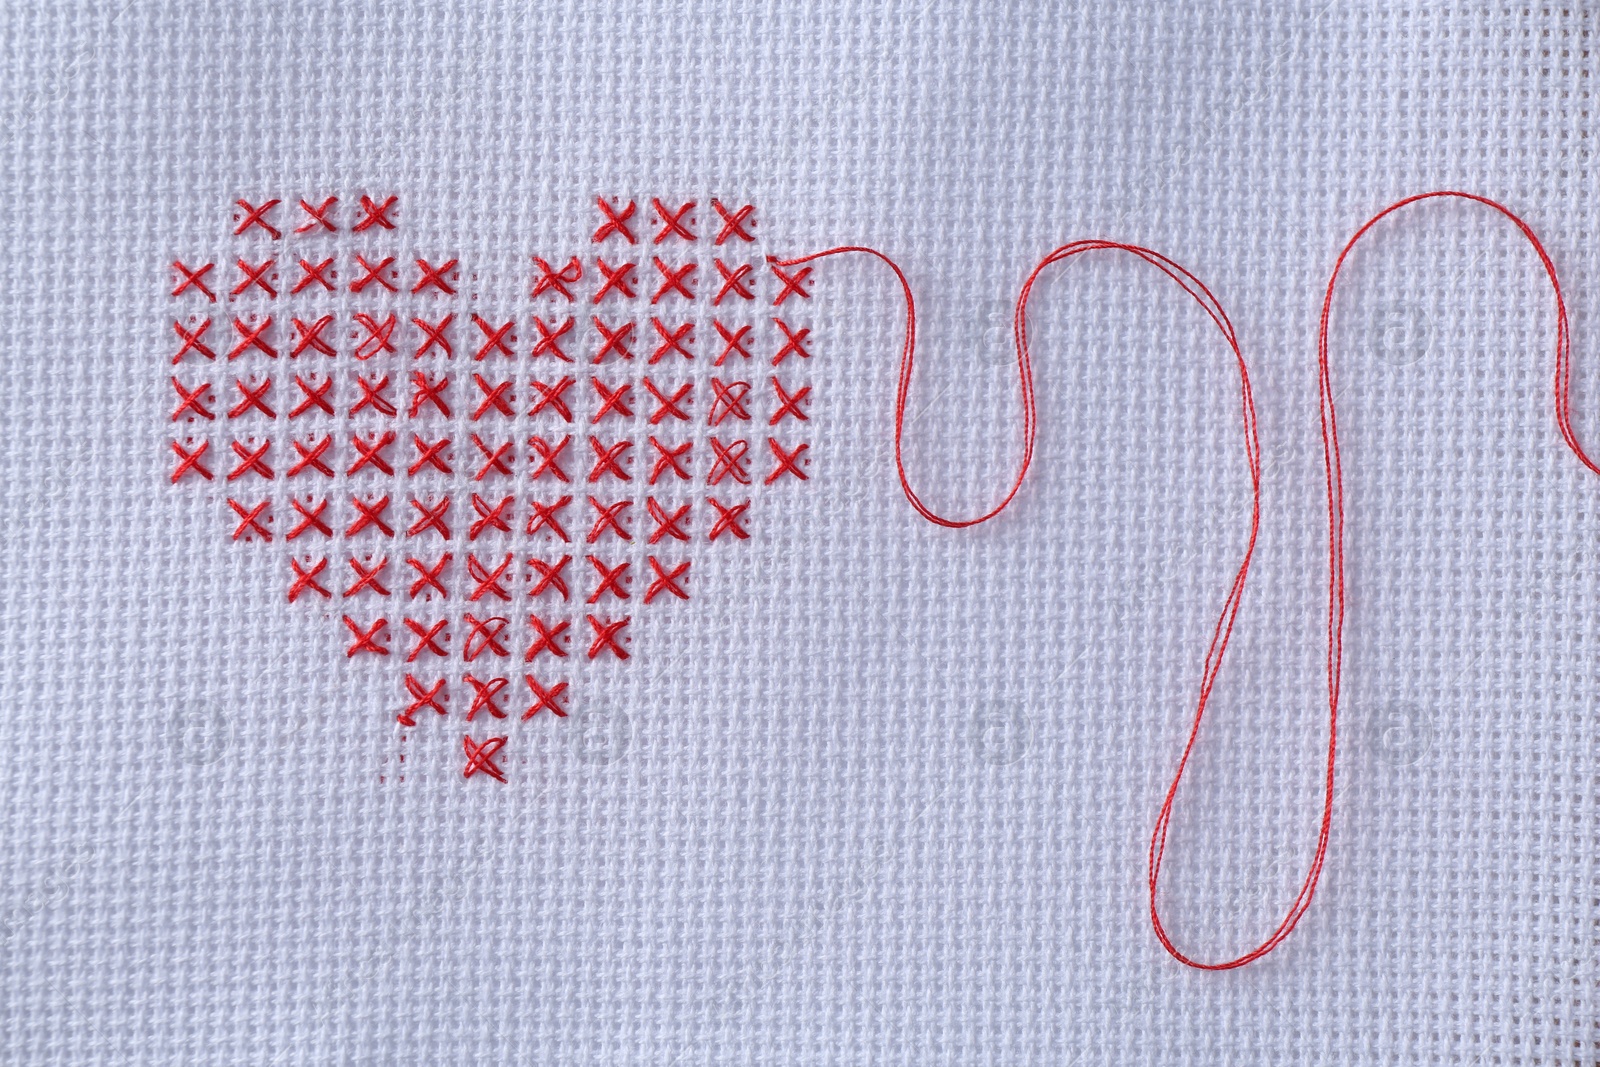 Photo of Embroidered red heart on white cloth, top view